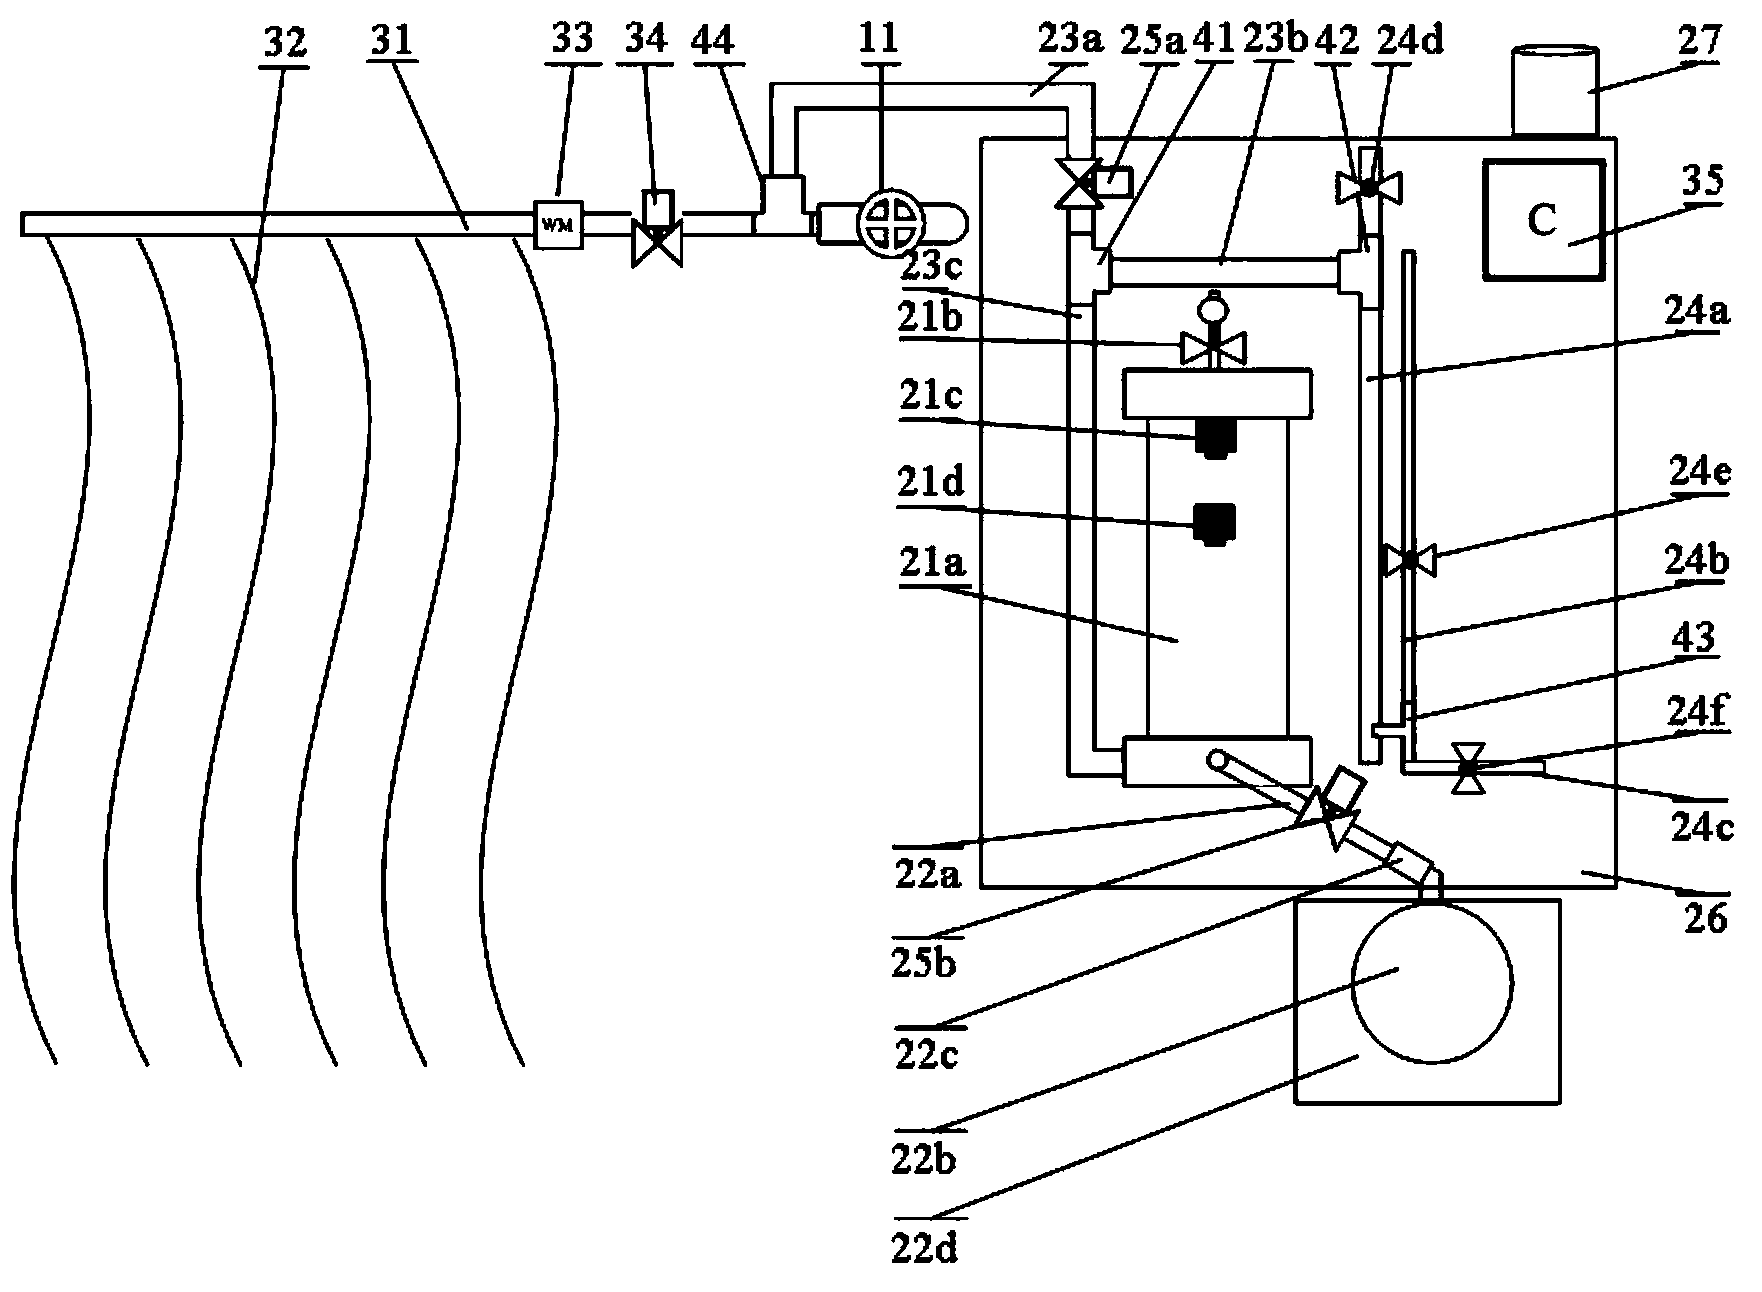 Automatic irrigation control method and control system based on crop water requirement measurement